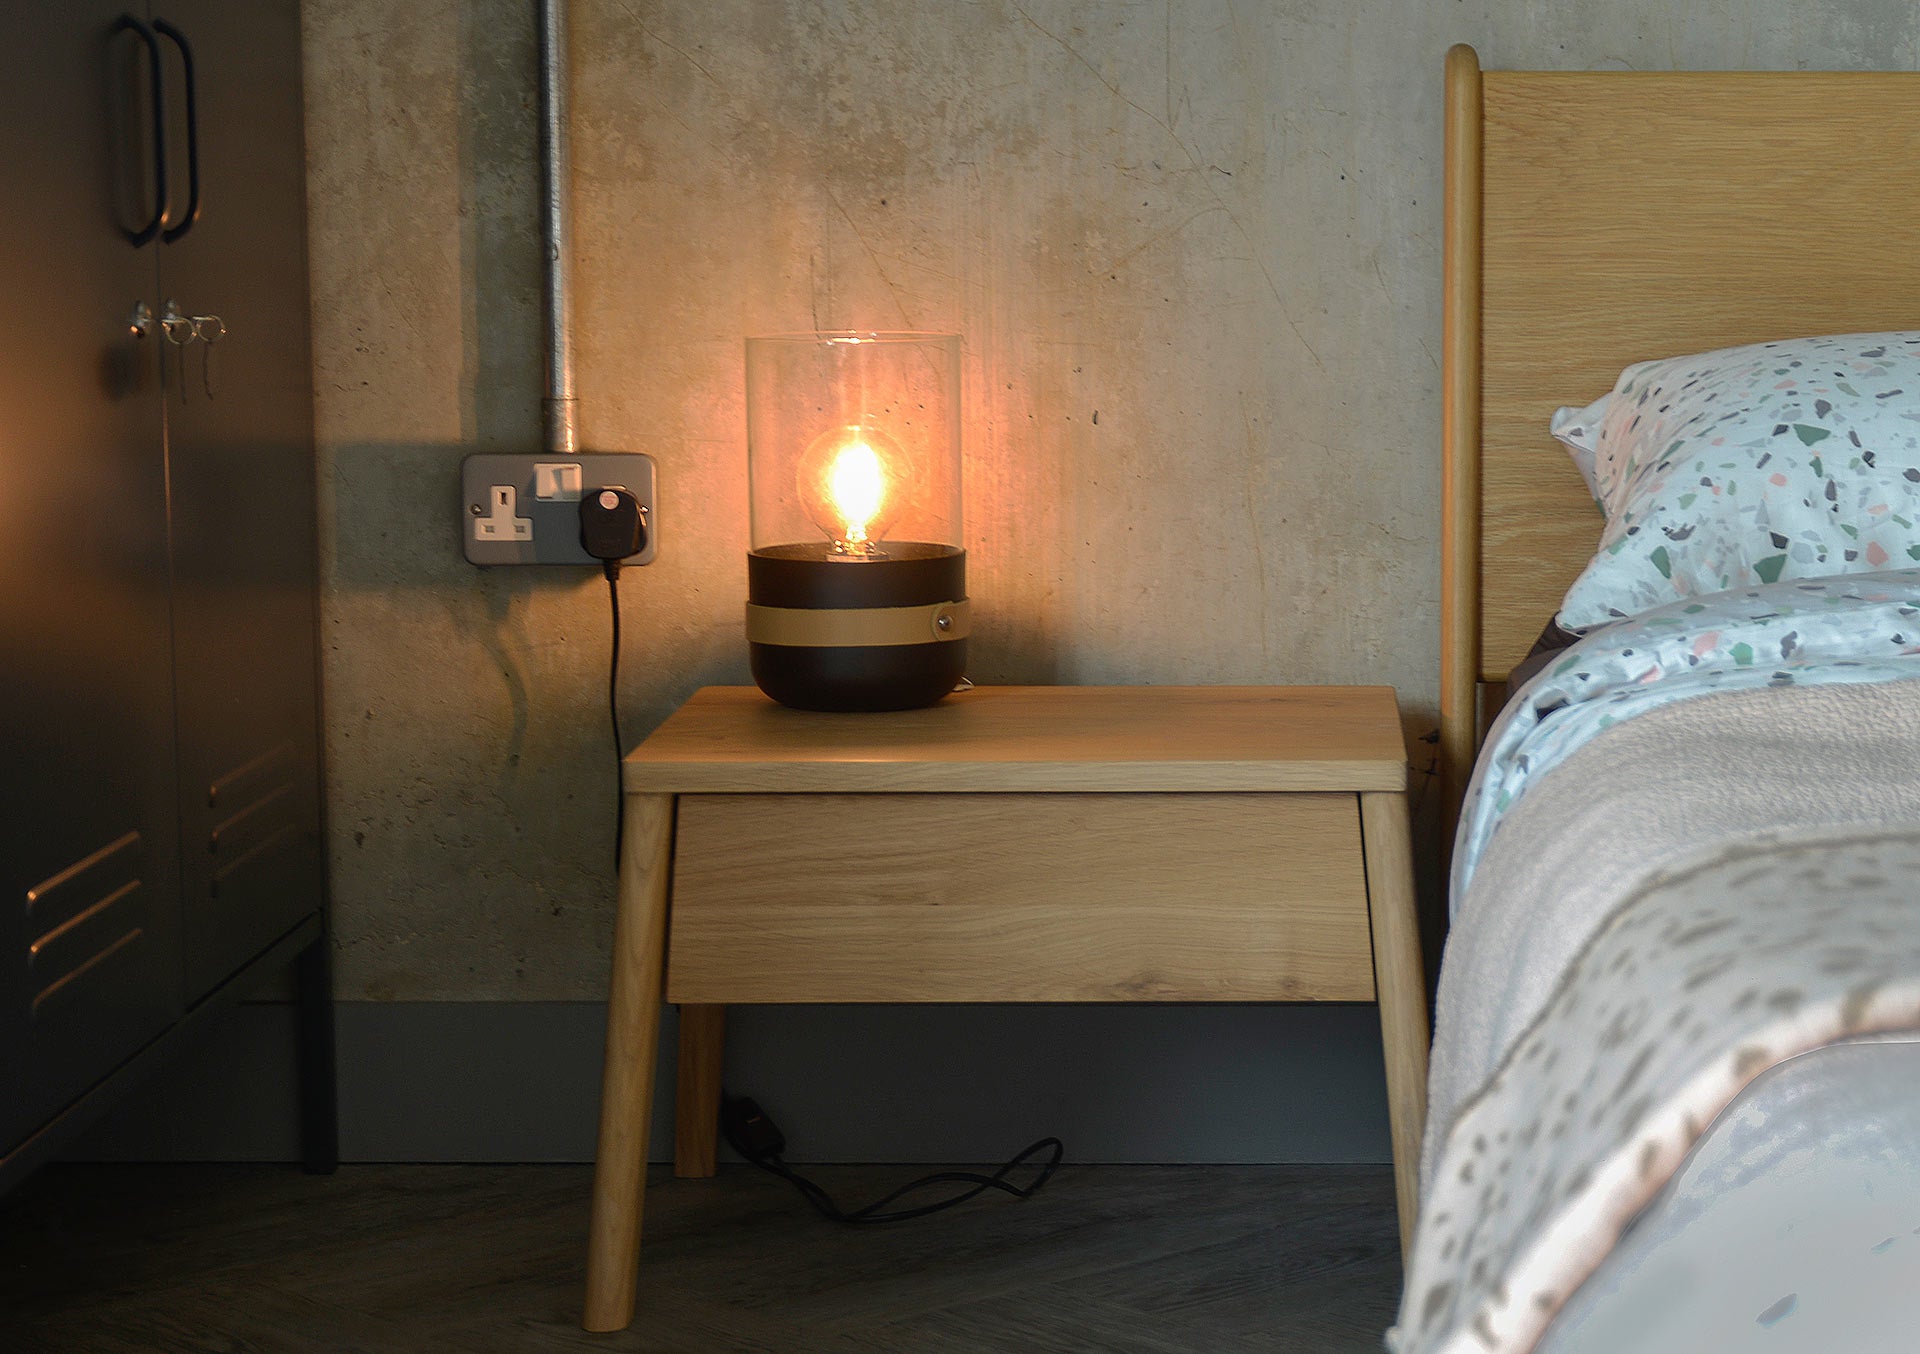 Ethnicraft Oak Air Bedside Table is available from Make Your House A Home, Bendigo, Victoria, Australia